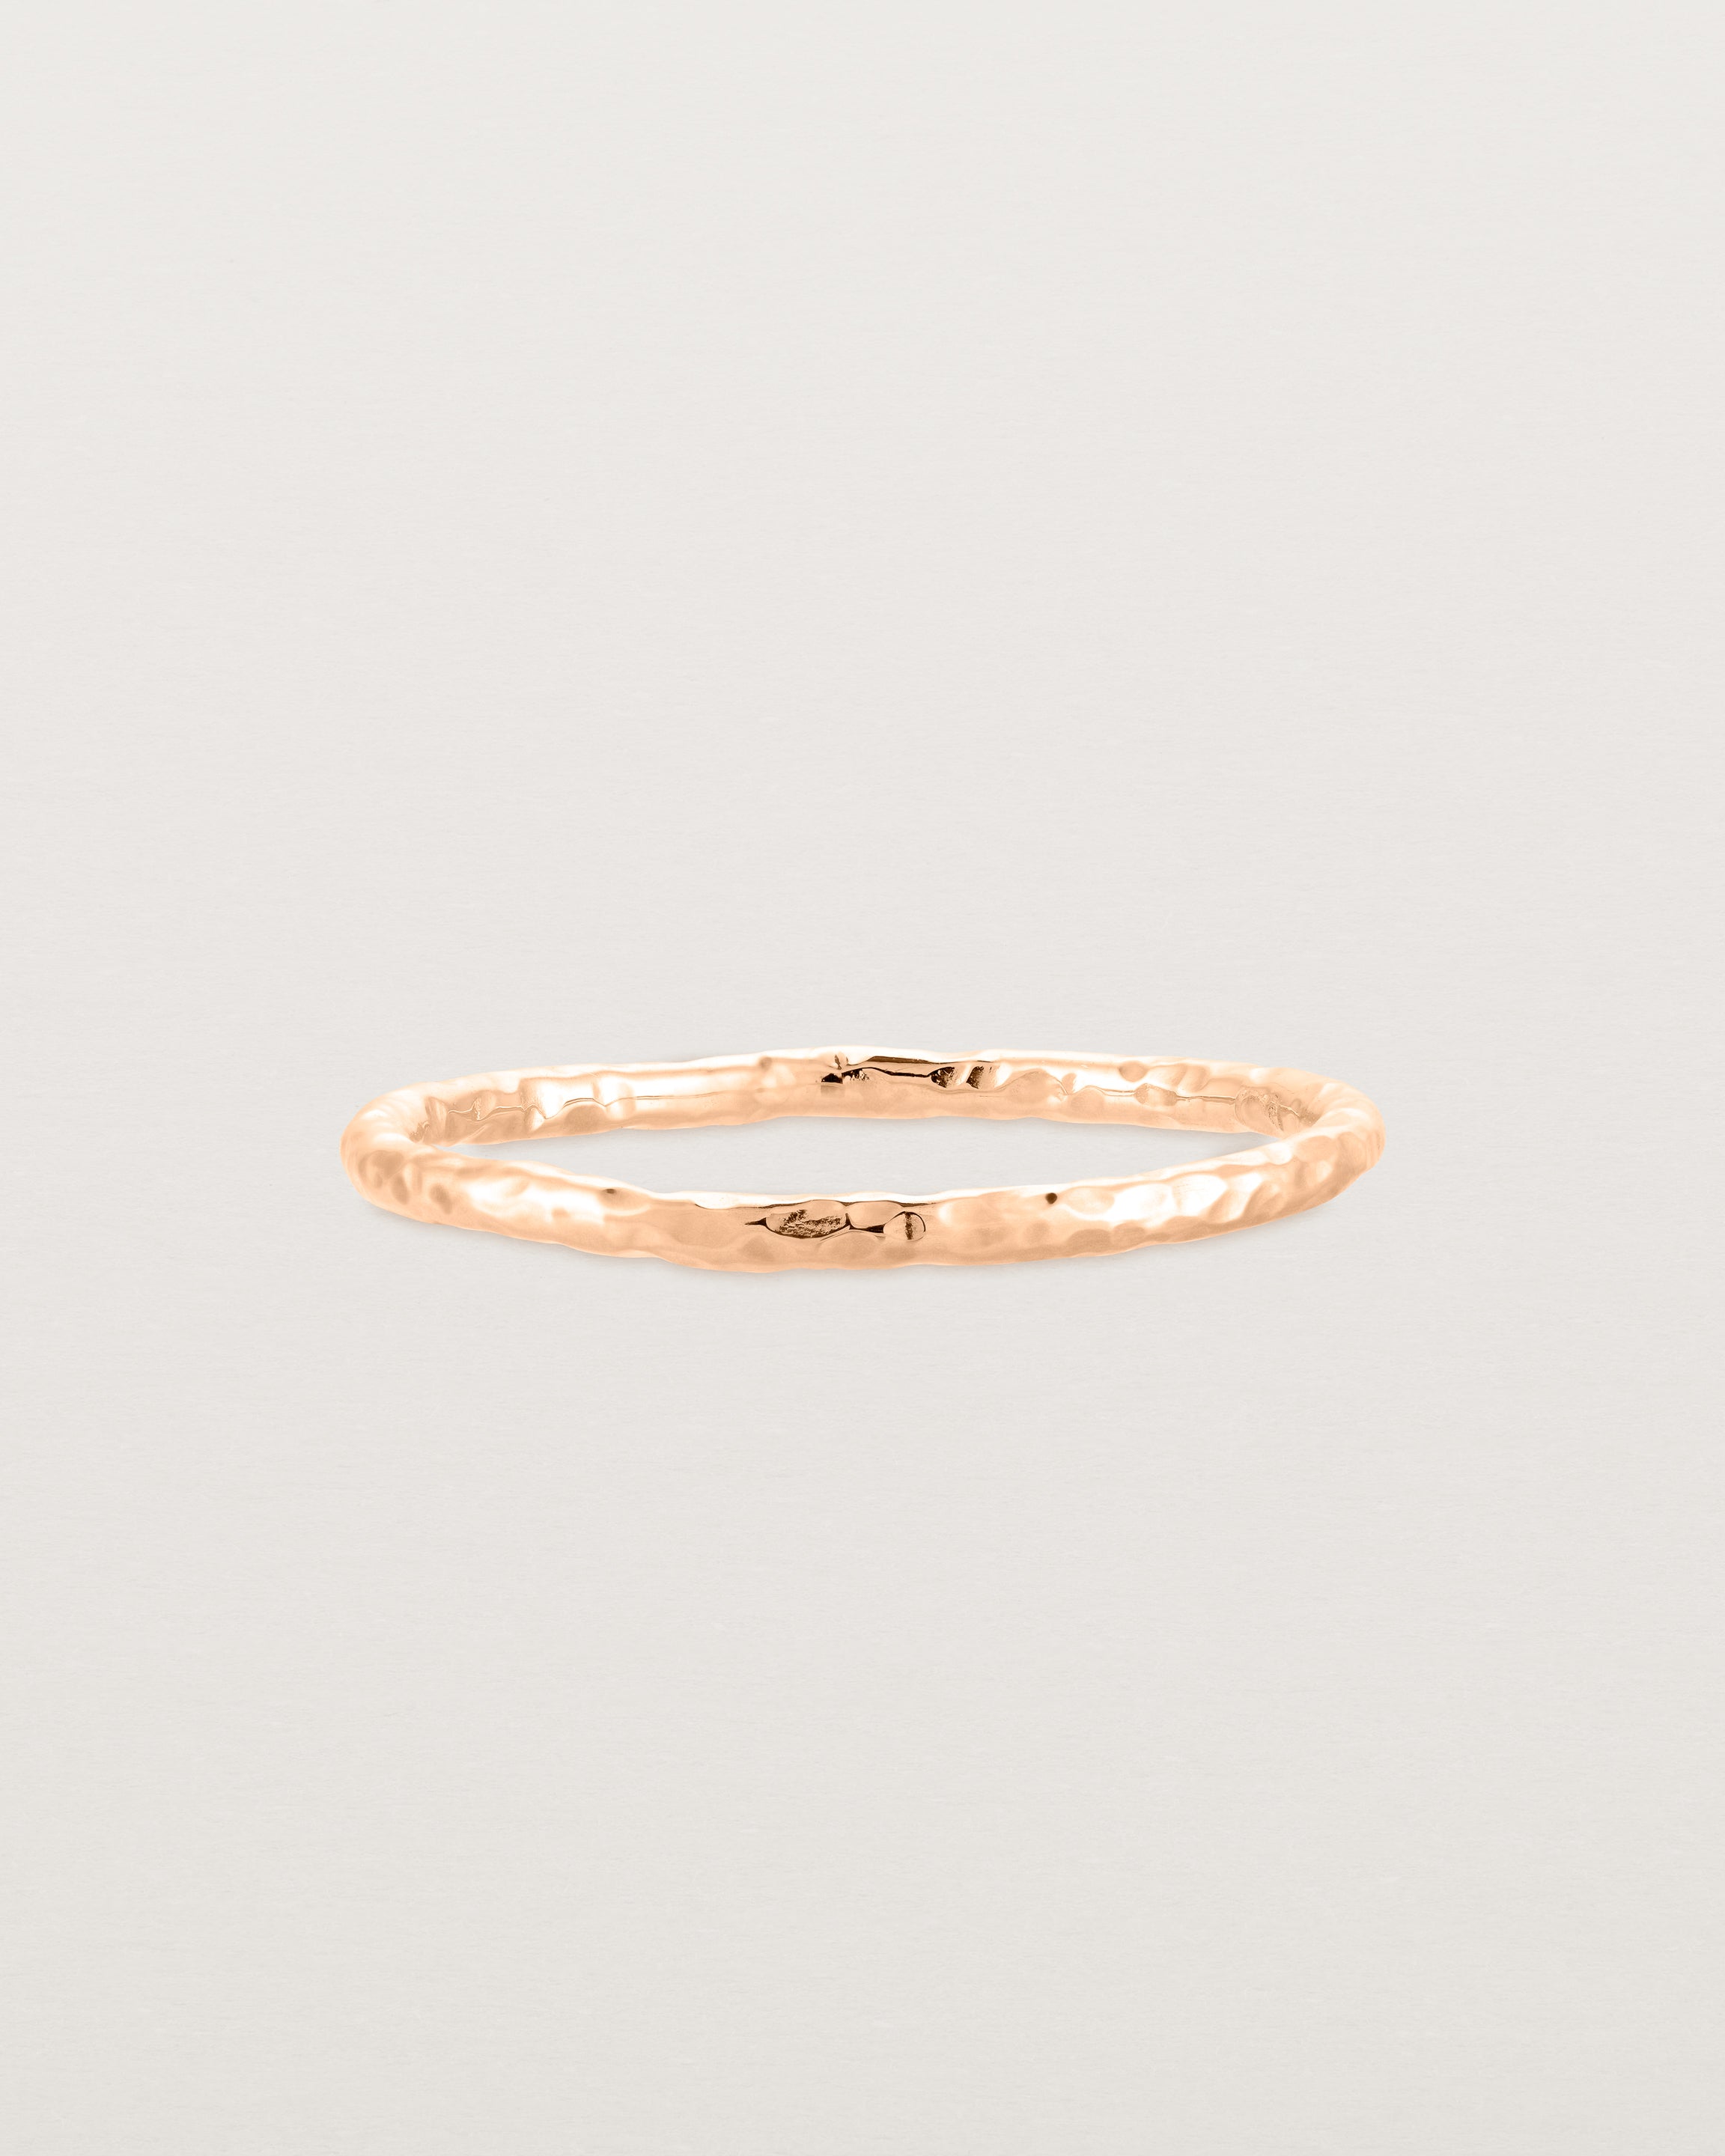 Front view of the Faceted Wedding Ring in Rose Gold.